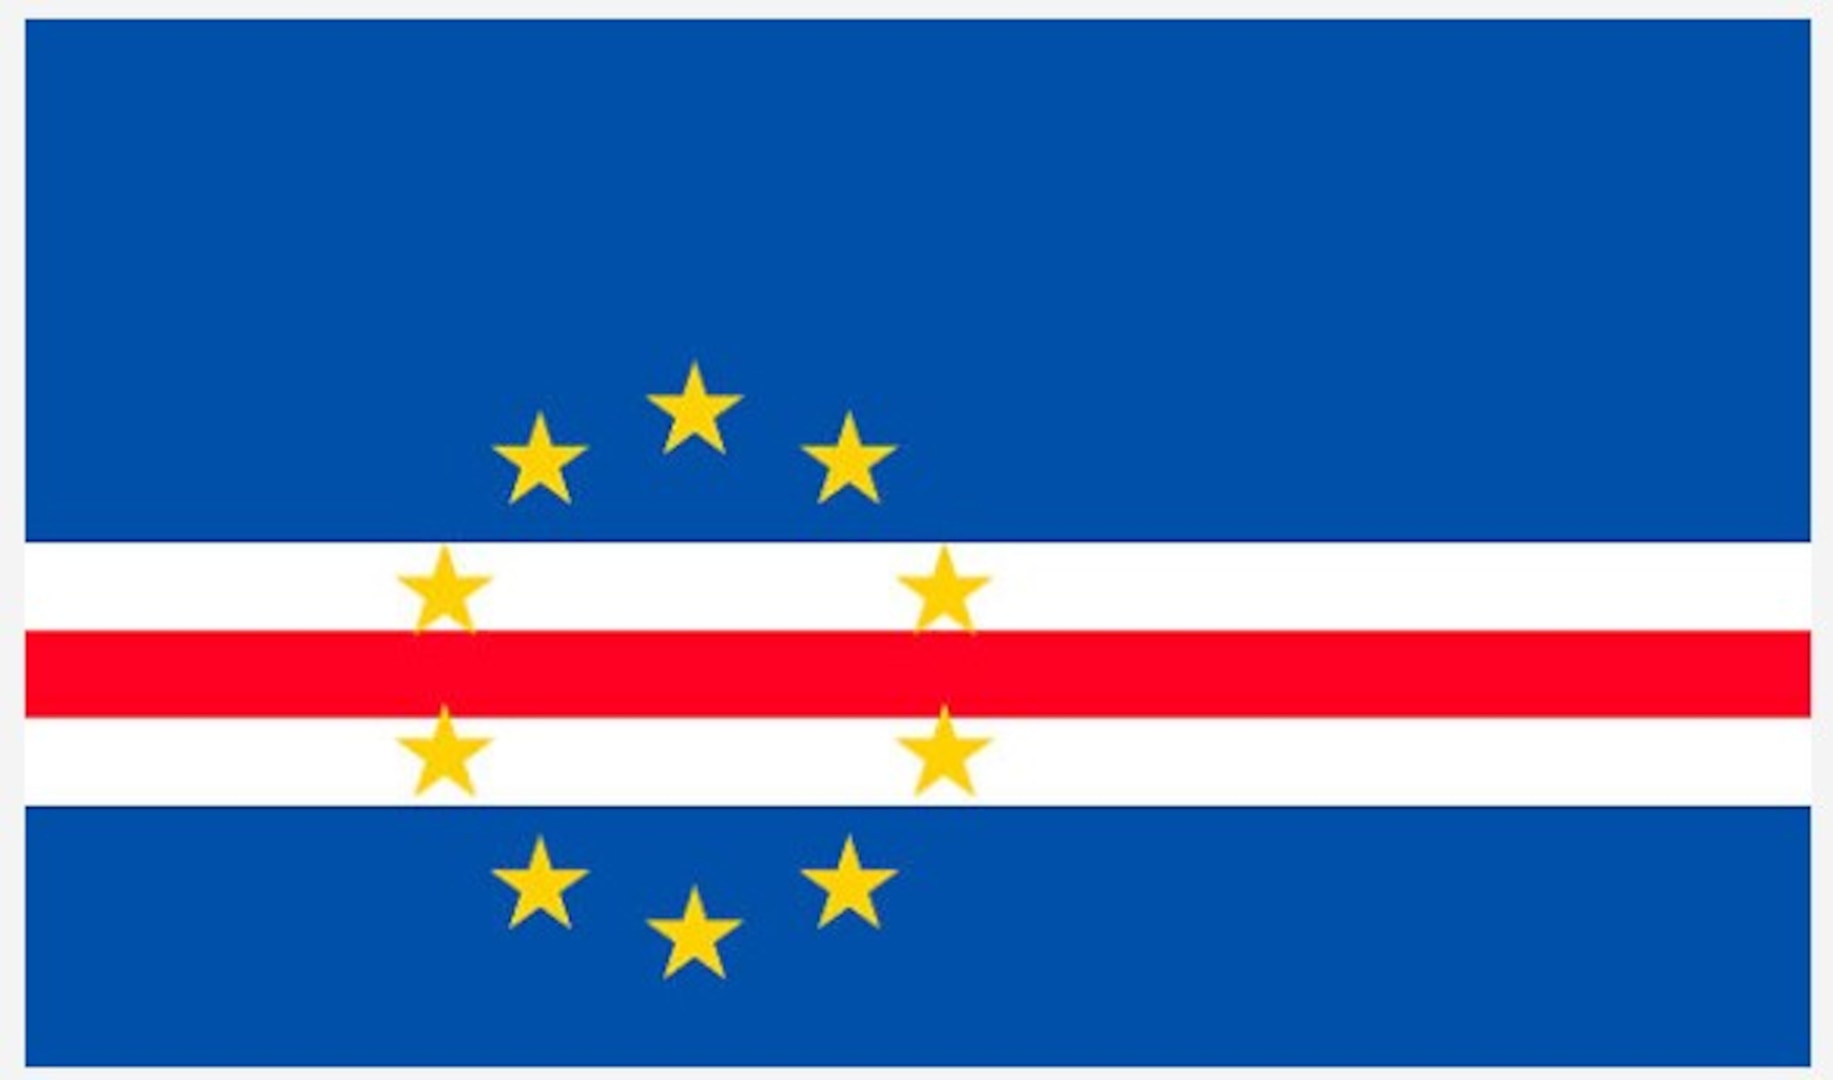 The national flag of Cabo Verde, adopted in 1992.